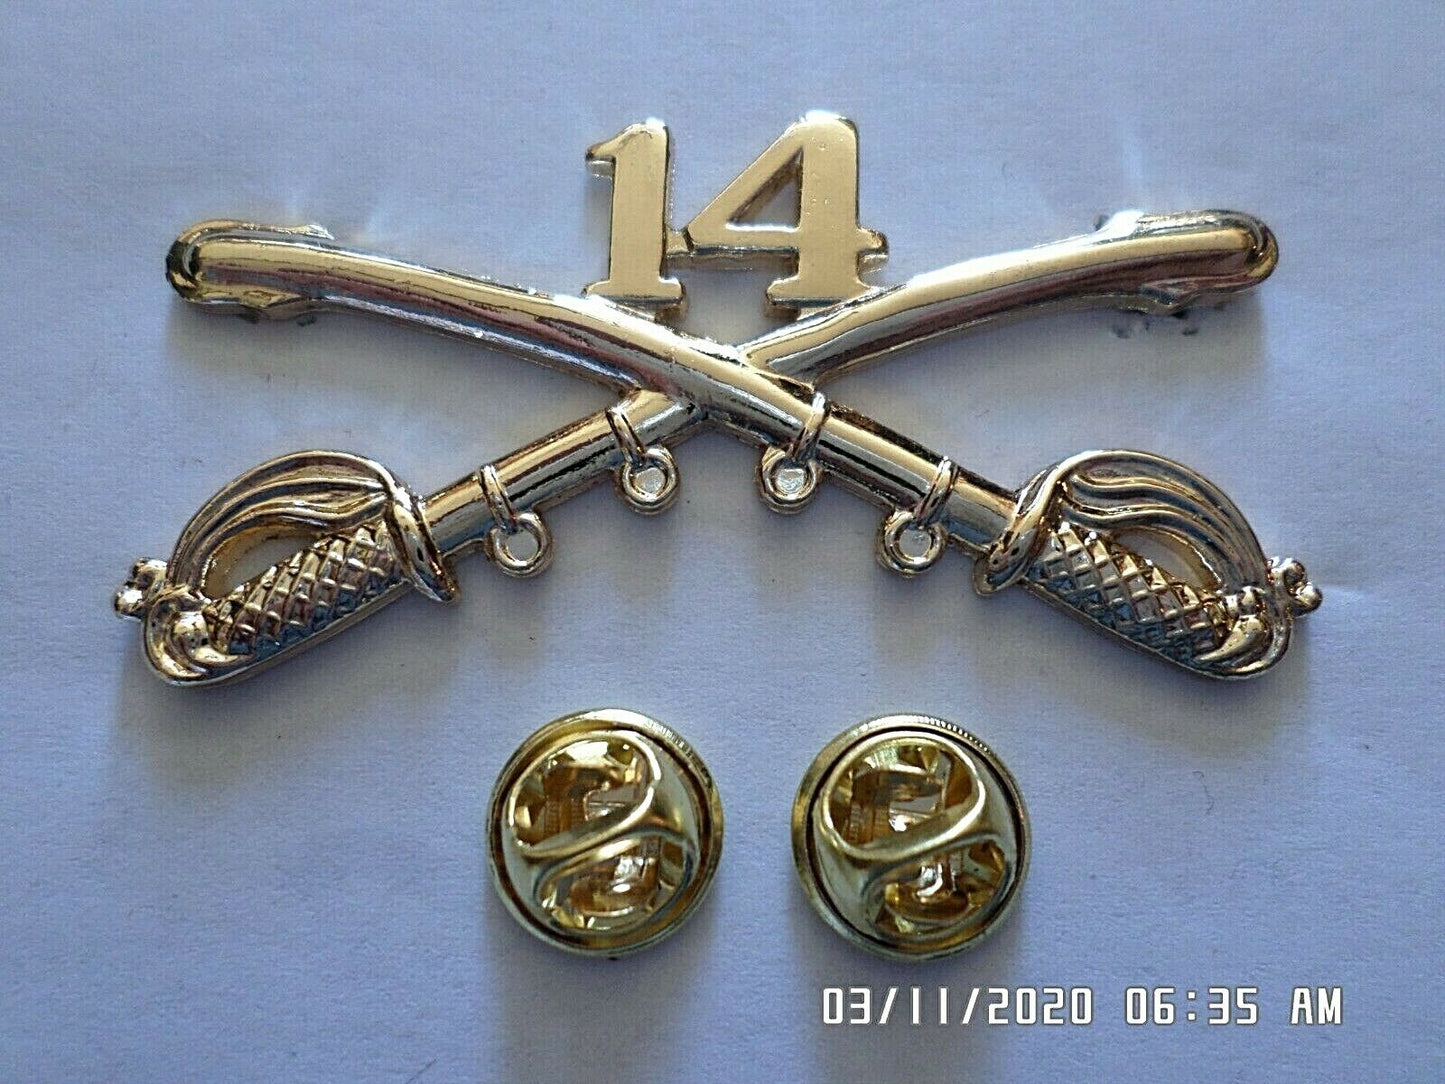 14th CAVALRY SWORDS SABERS MILITARY HAT PIN 14th CAVALRY REGIMENT BADGE U.S ARMY